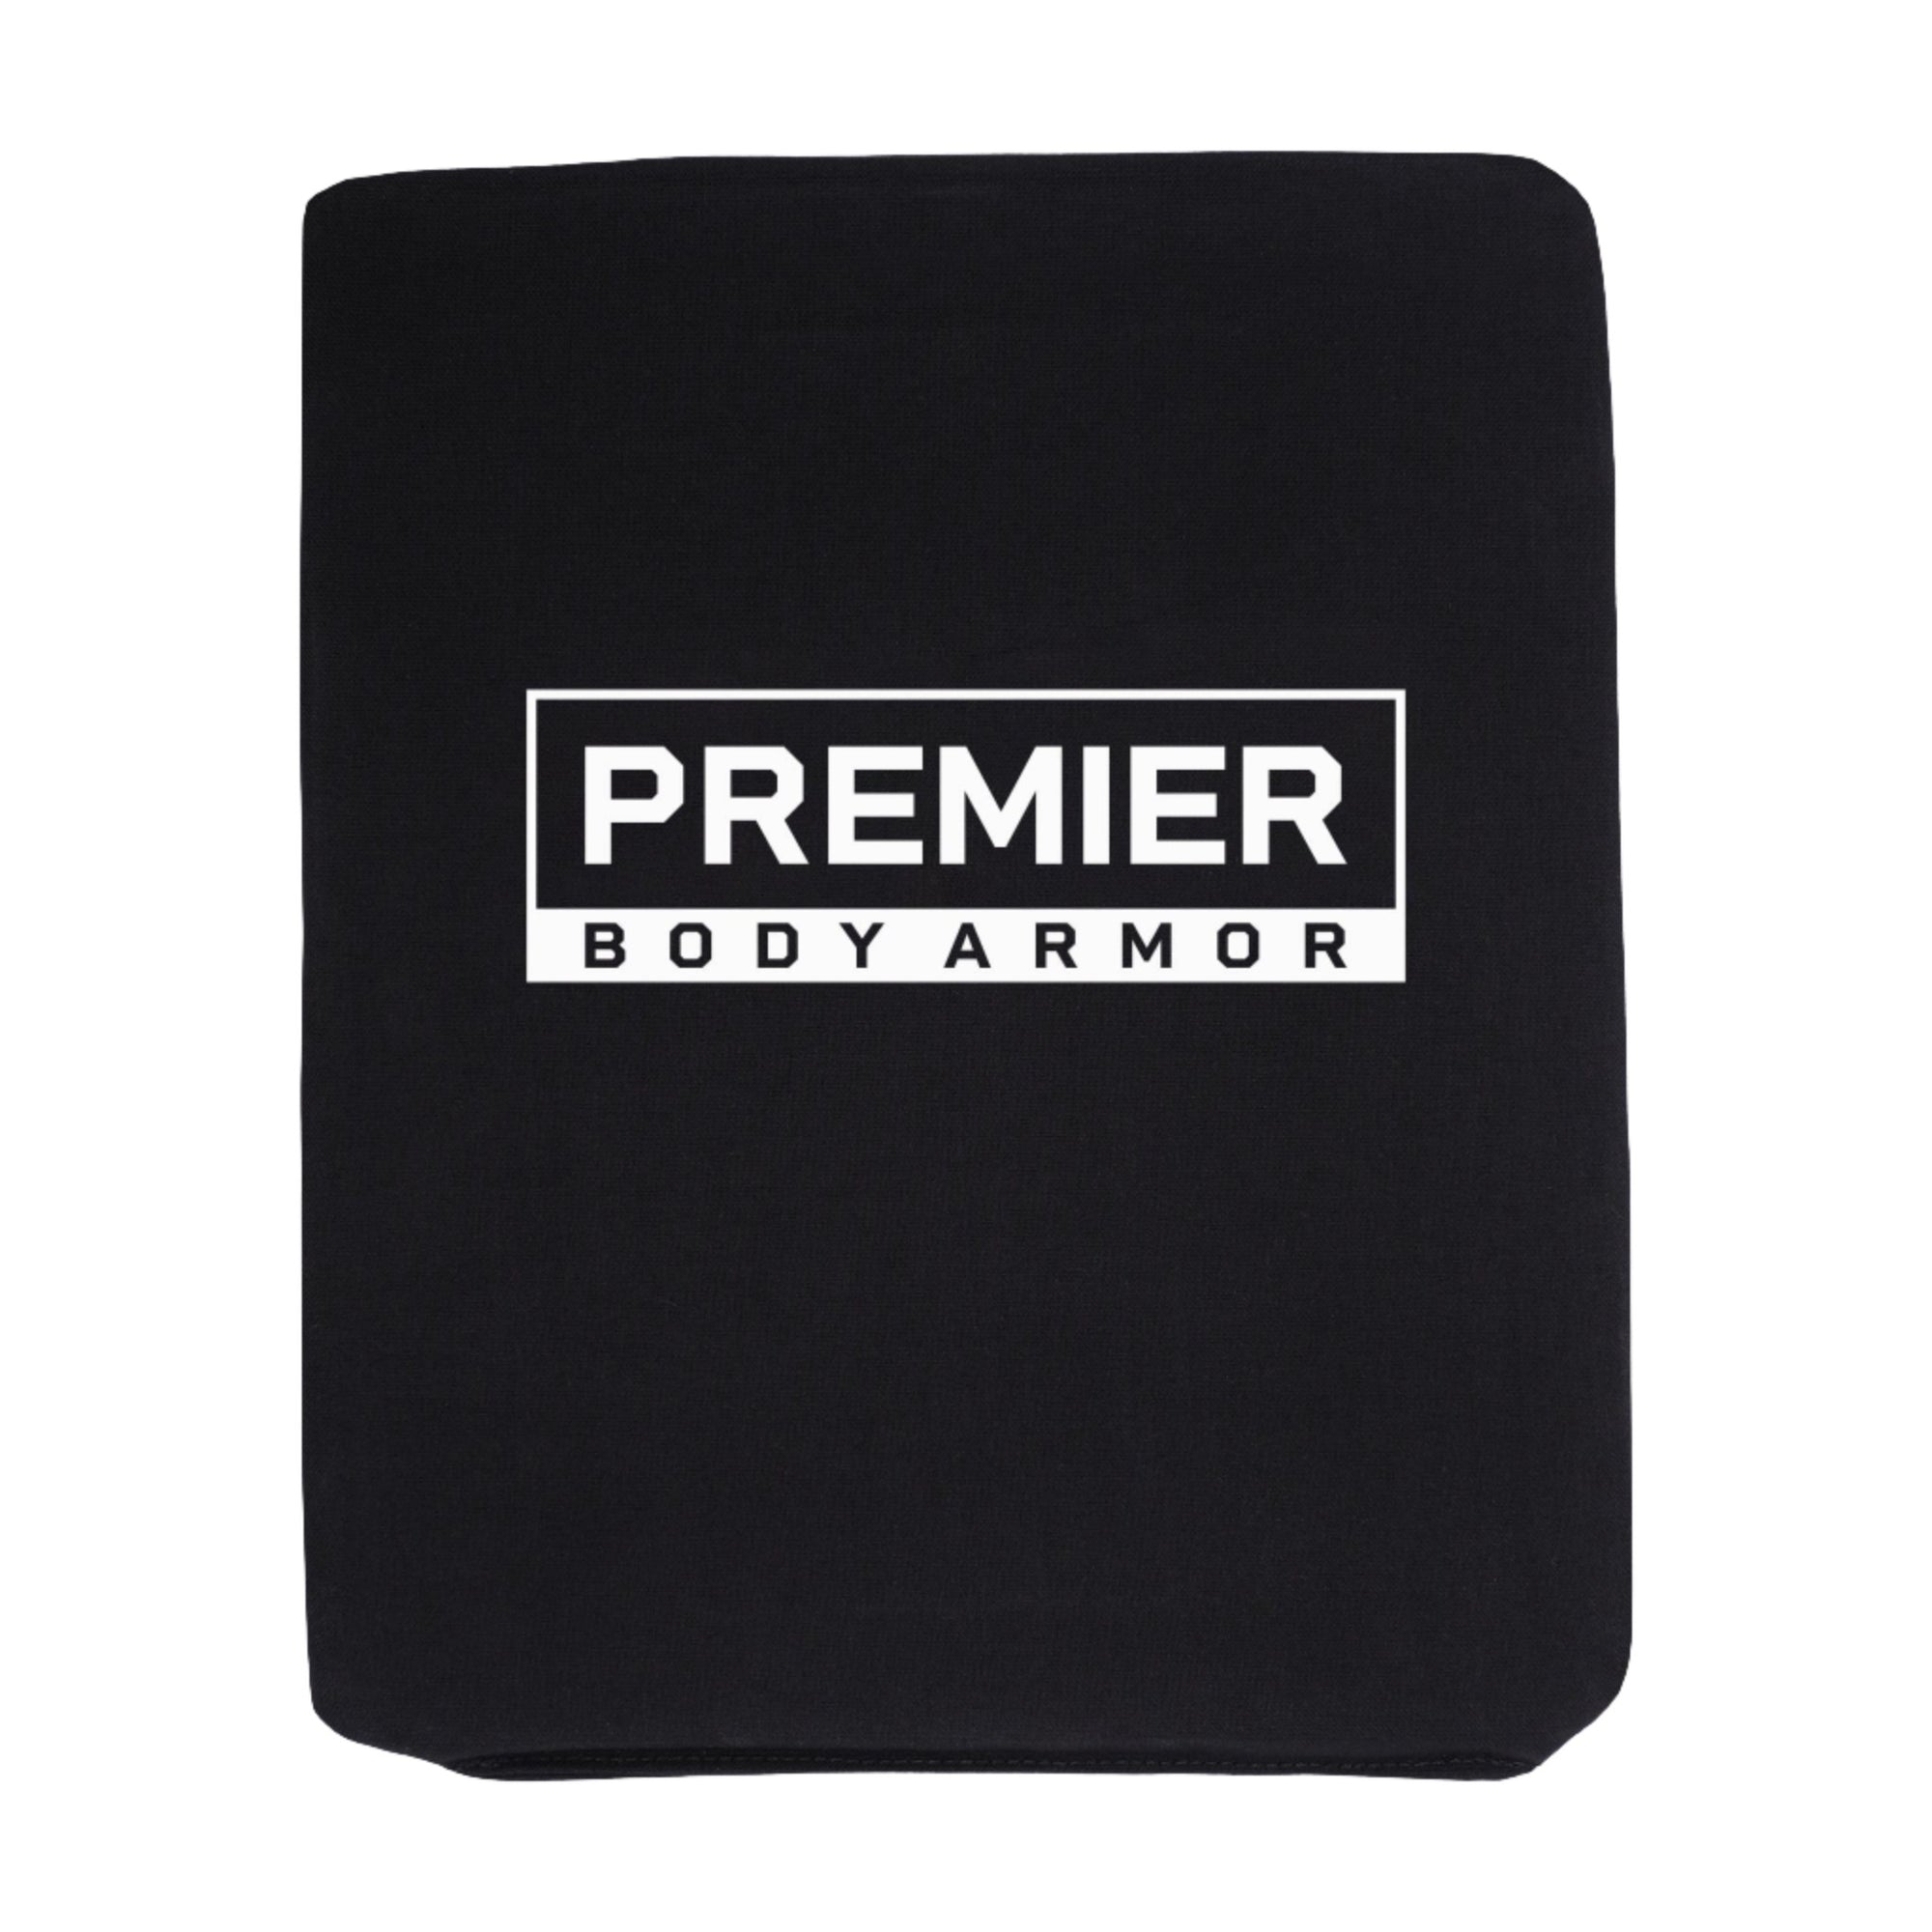 Our 10 x 12 Rectangular ballistic plates are the perfect option for bullet proof backpacks. 